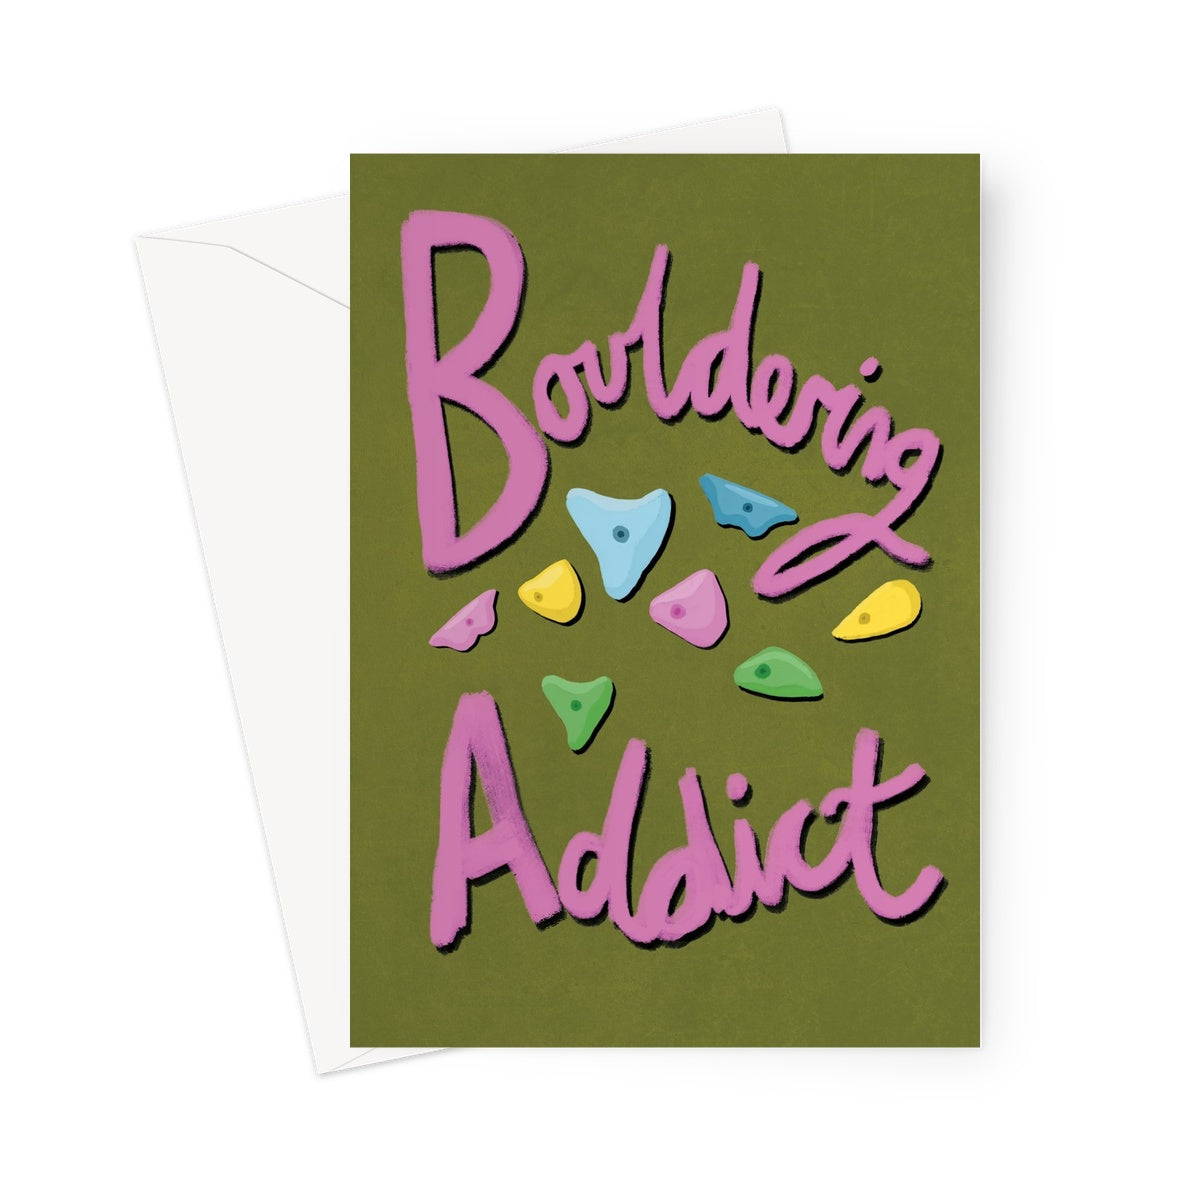 Bouldering Addict - Olive Green and Pink Greeting Card